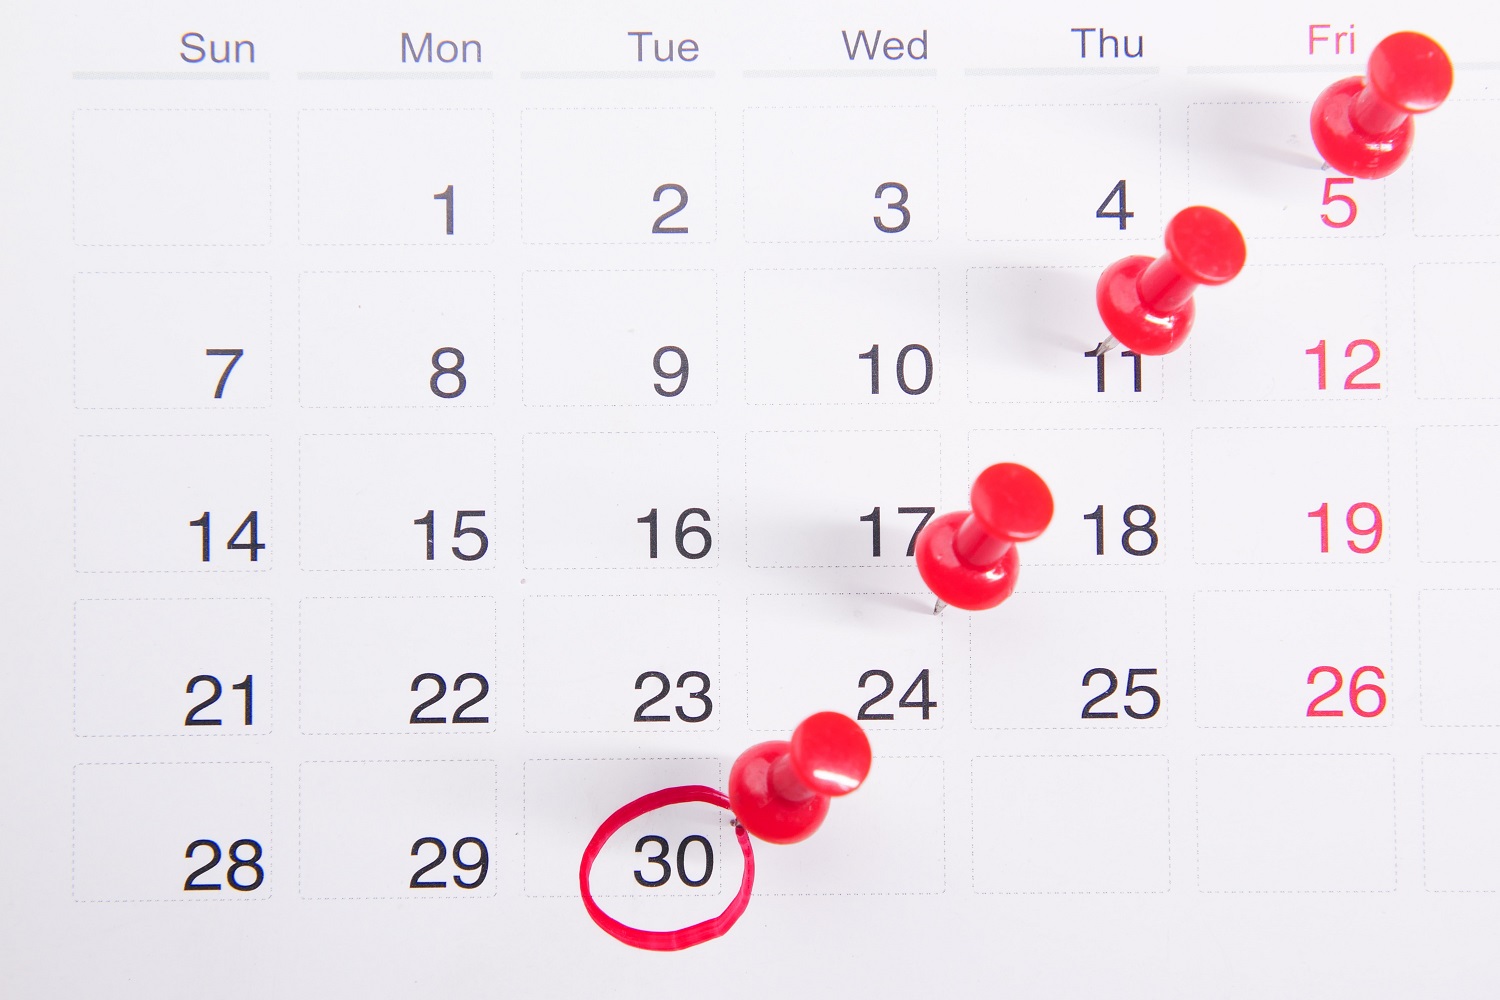 The Step-by-Step Process to Create a Content Calendar That Aligns With Your Business Goals